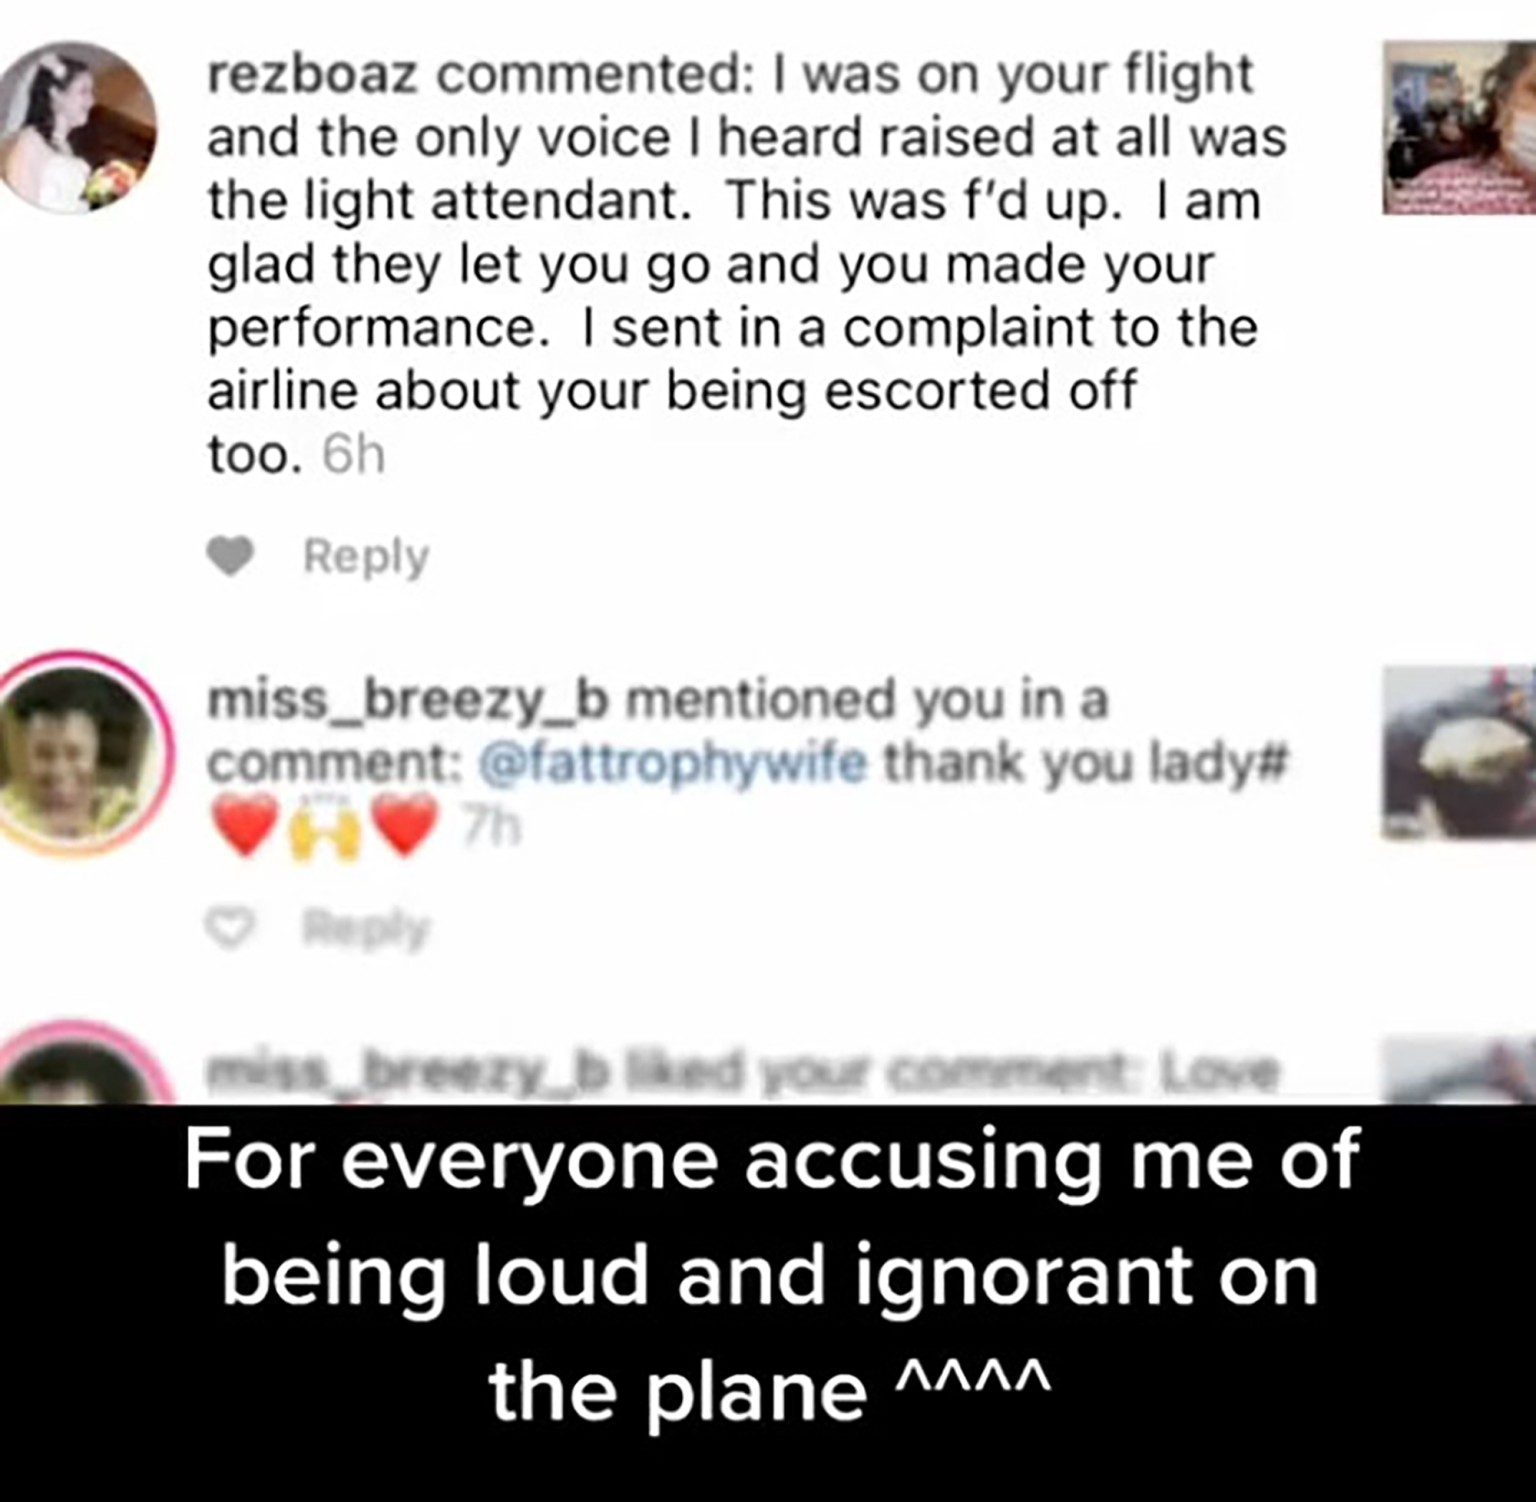 Woman Kicked Out Of Plane Claims Discrimination!